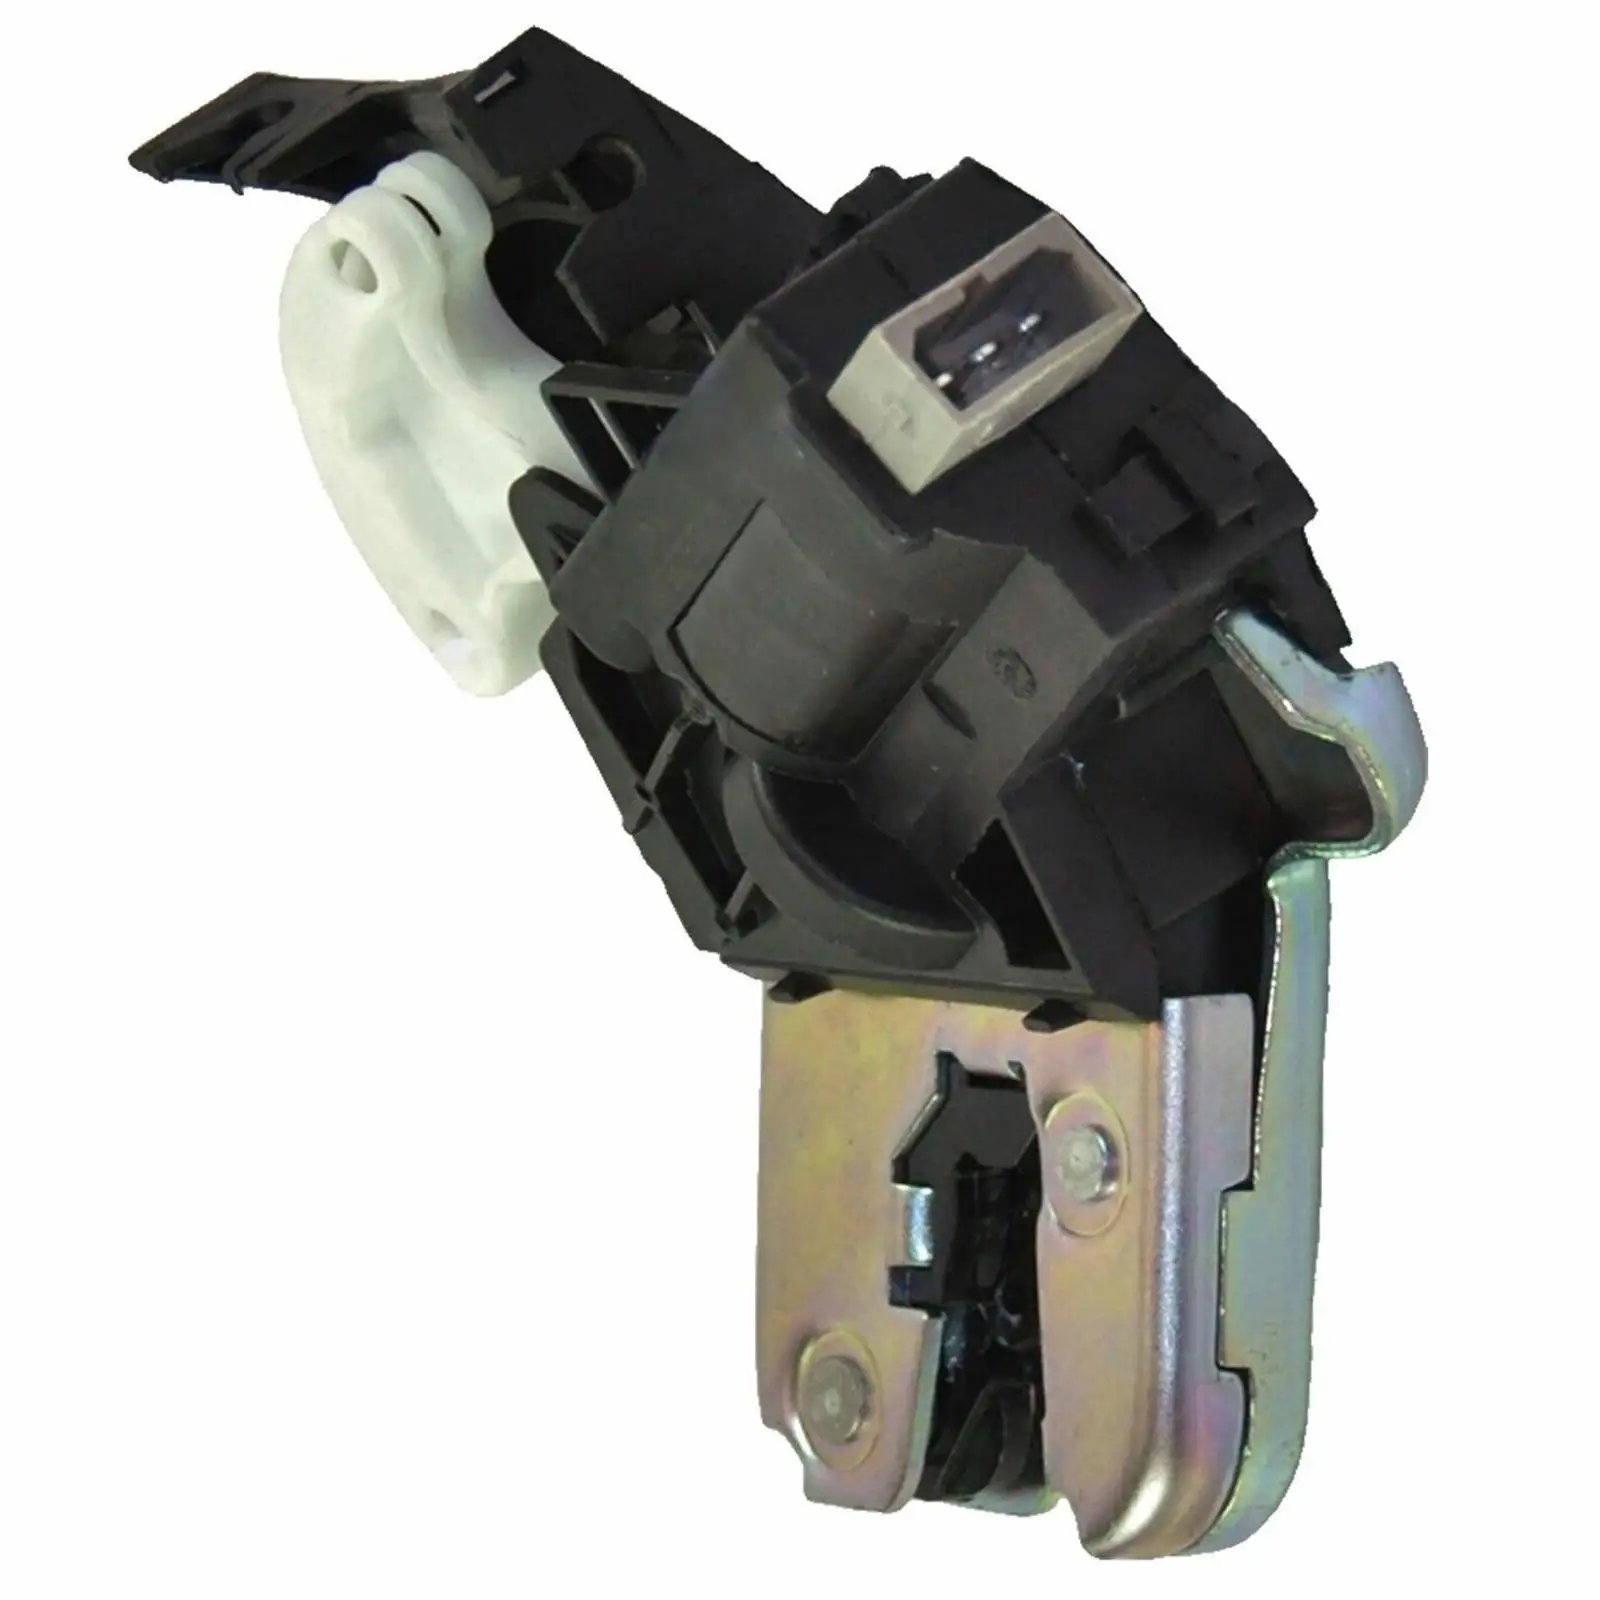 Tailgate Boot Lock Latch Actuator 4F5827505B Directly Replace 4F5827505A 4E0827505C for Golf cc Automotive Accessories